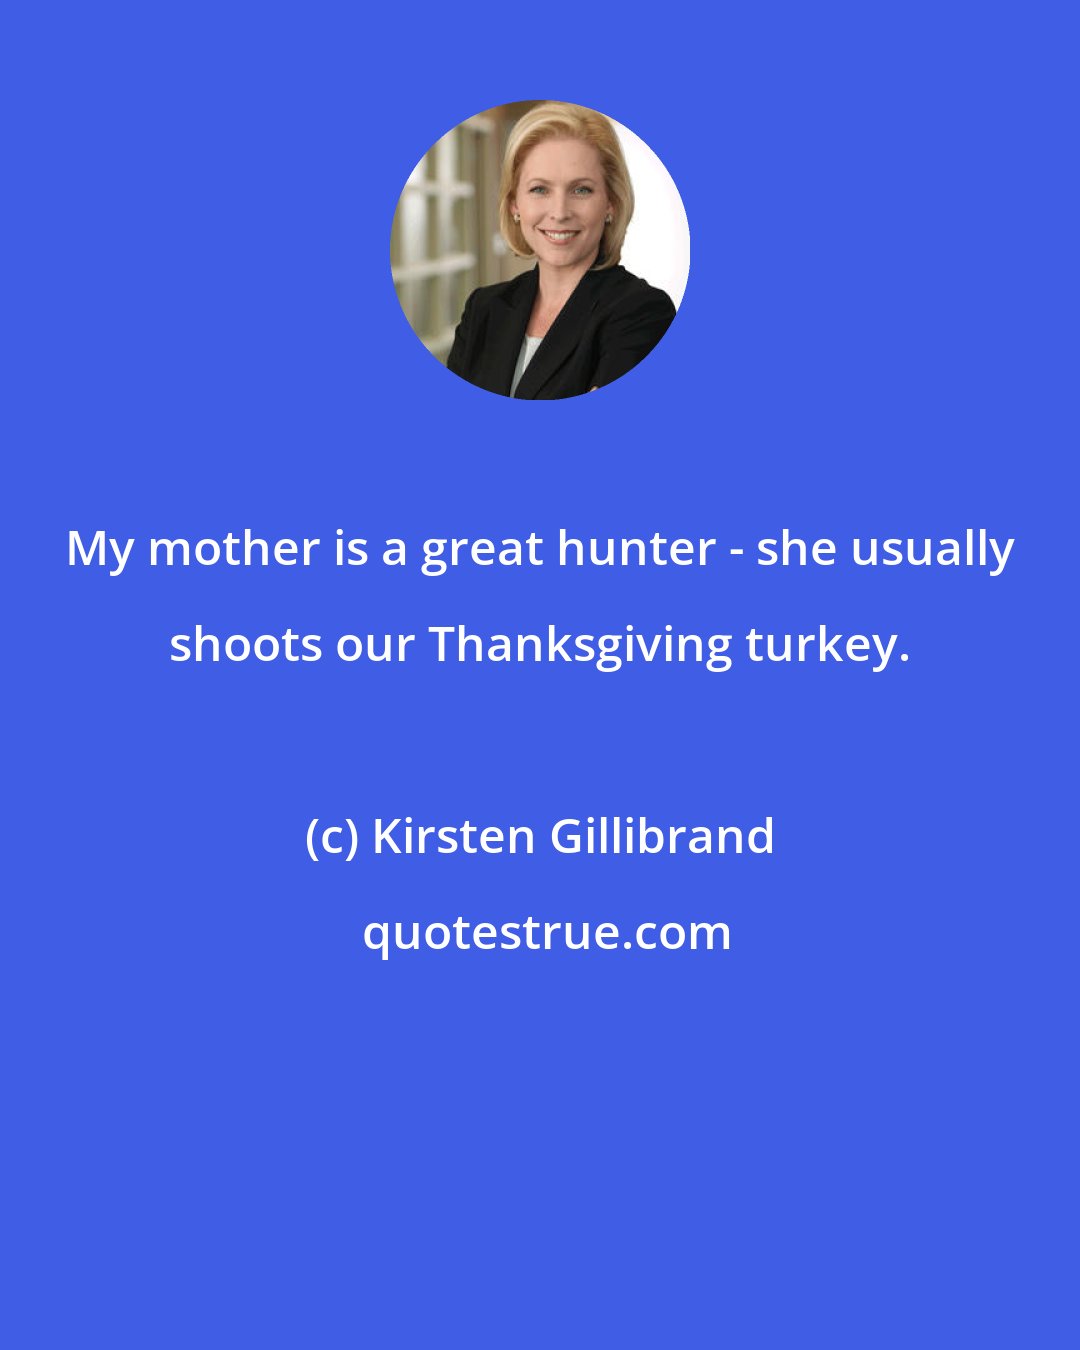 Kirsten Gillibrand: My mother is a great hunter - she usually shoots our Thanksgiving turkey.